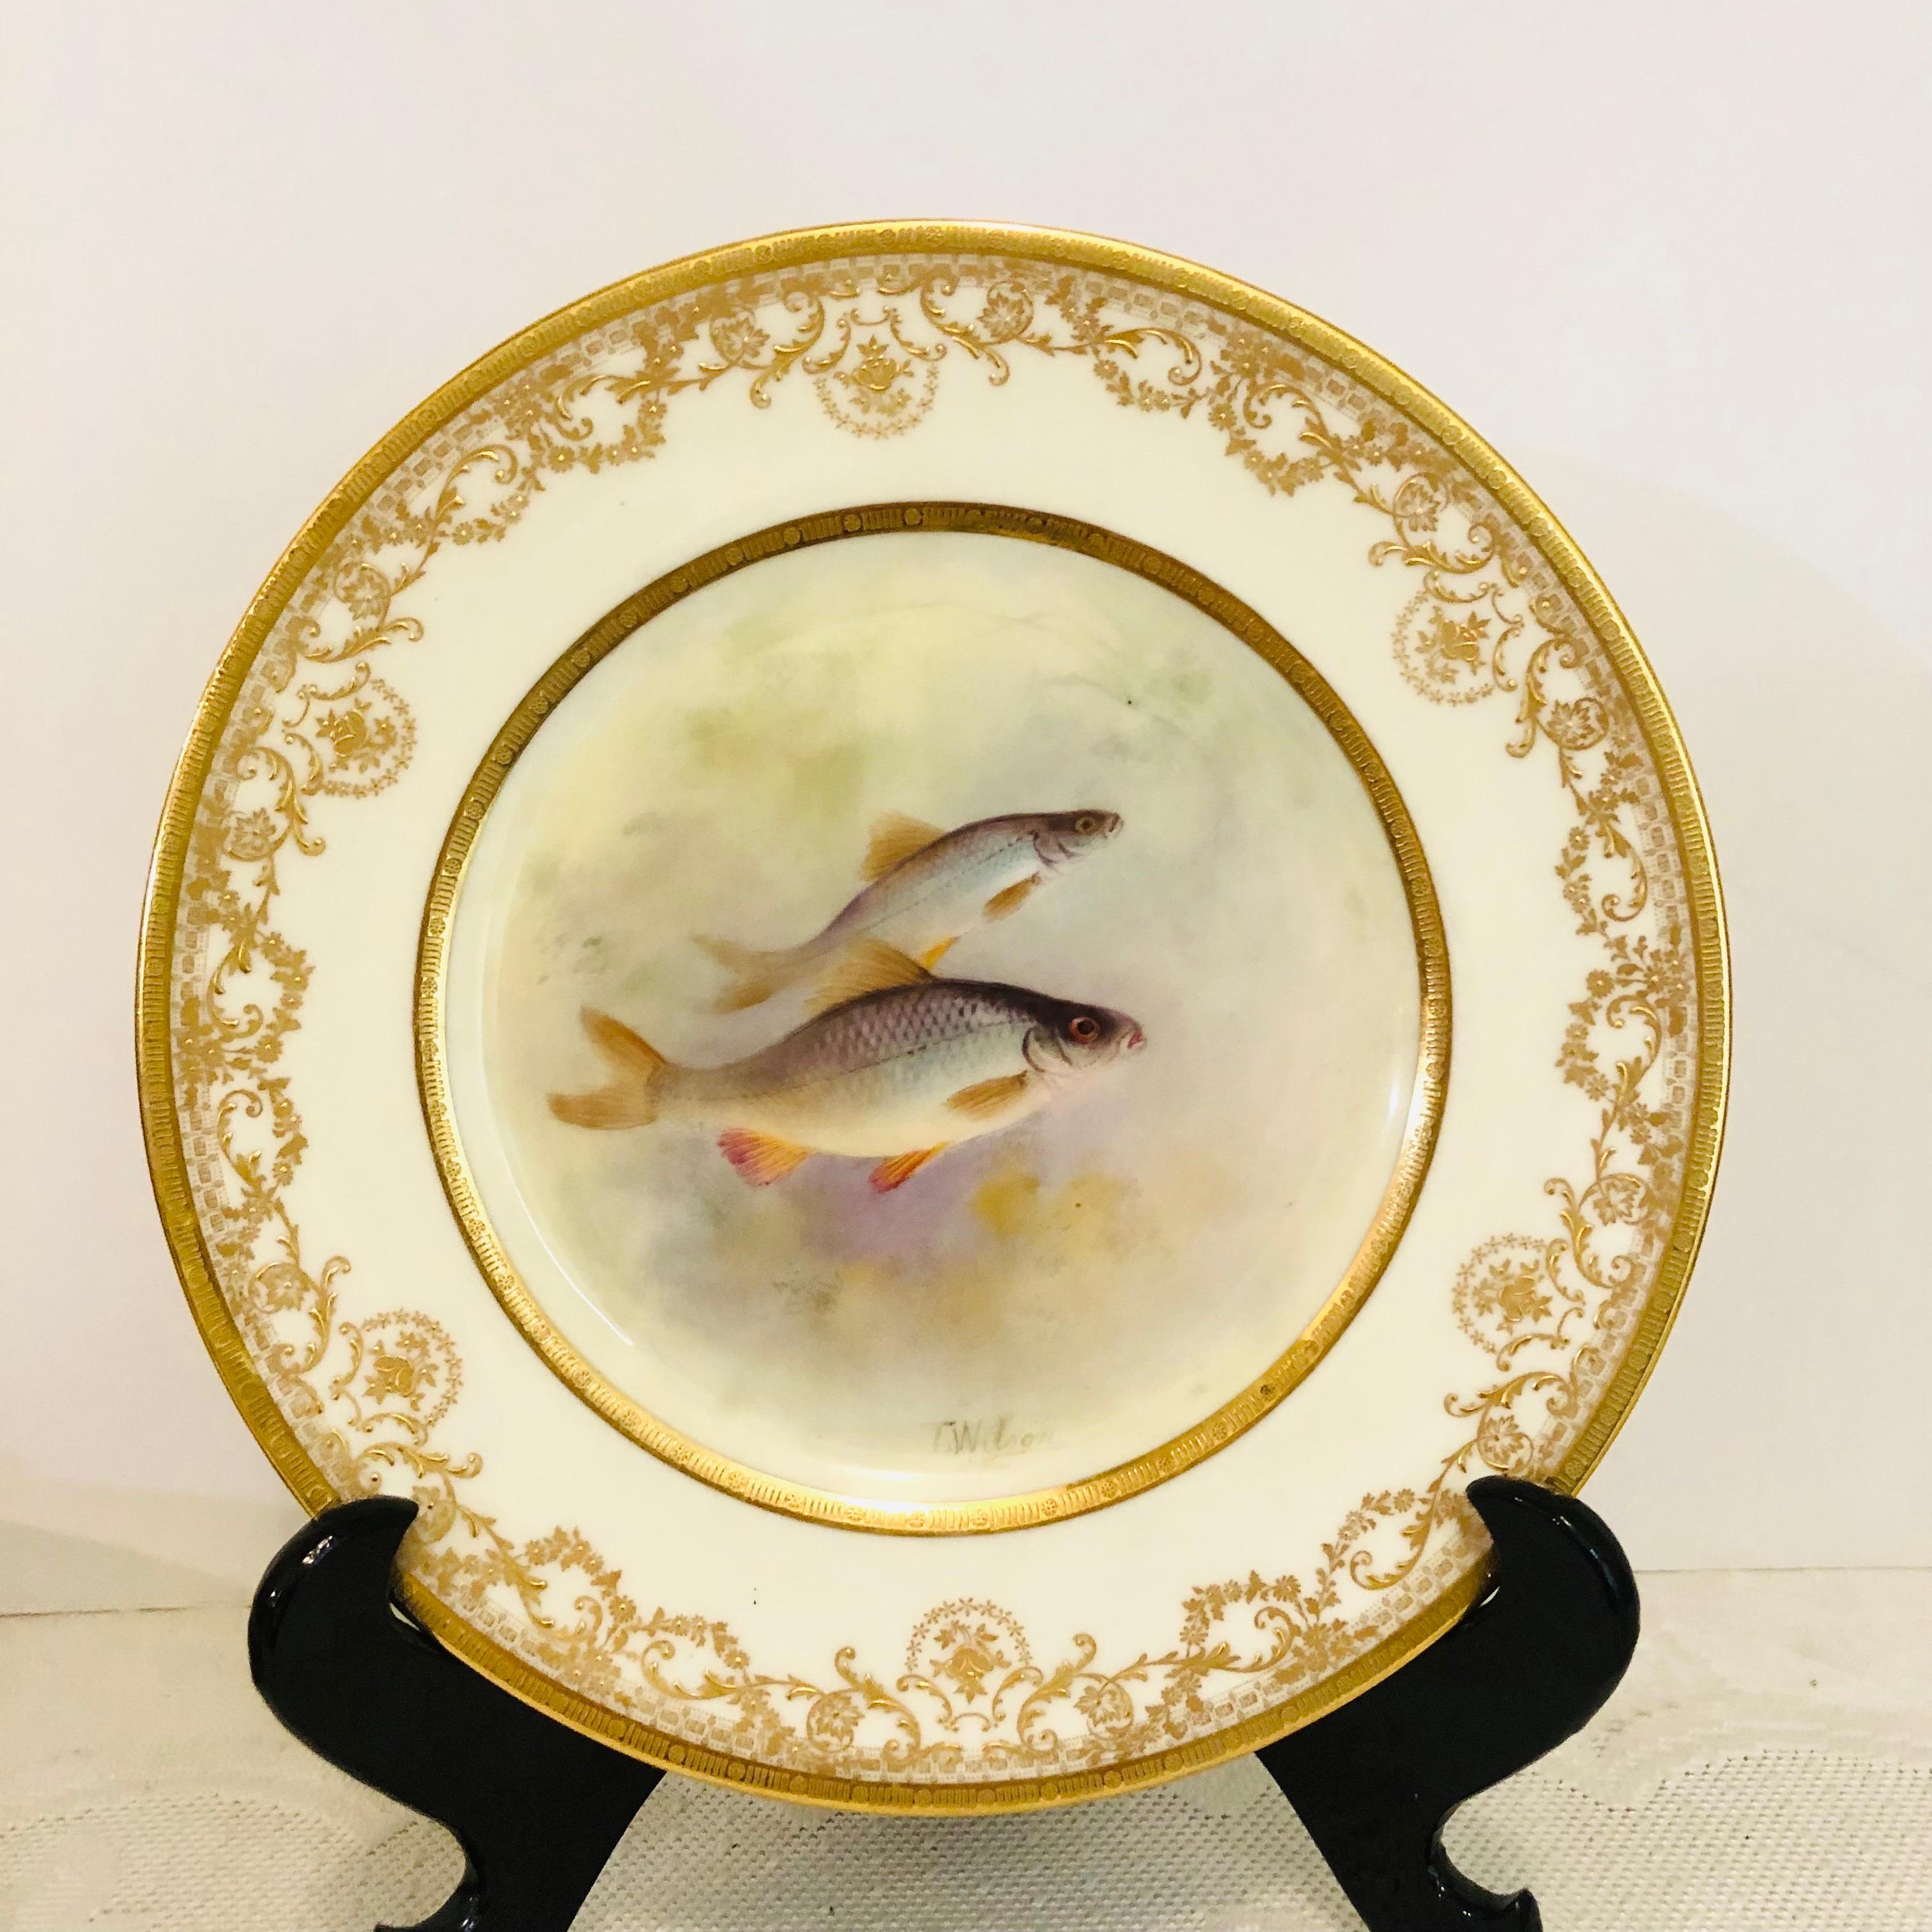 Set of 12 Royal Doulton Fish Plates Each Hand Painted with Different Fish  5